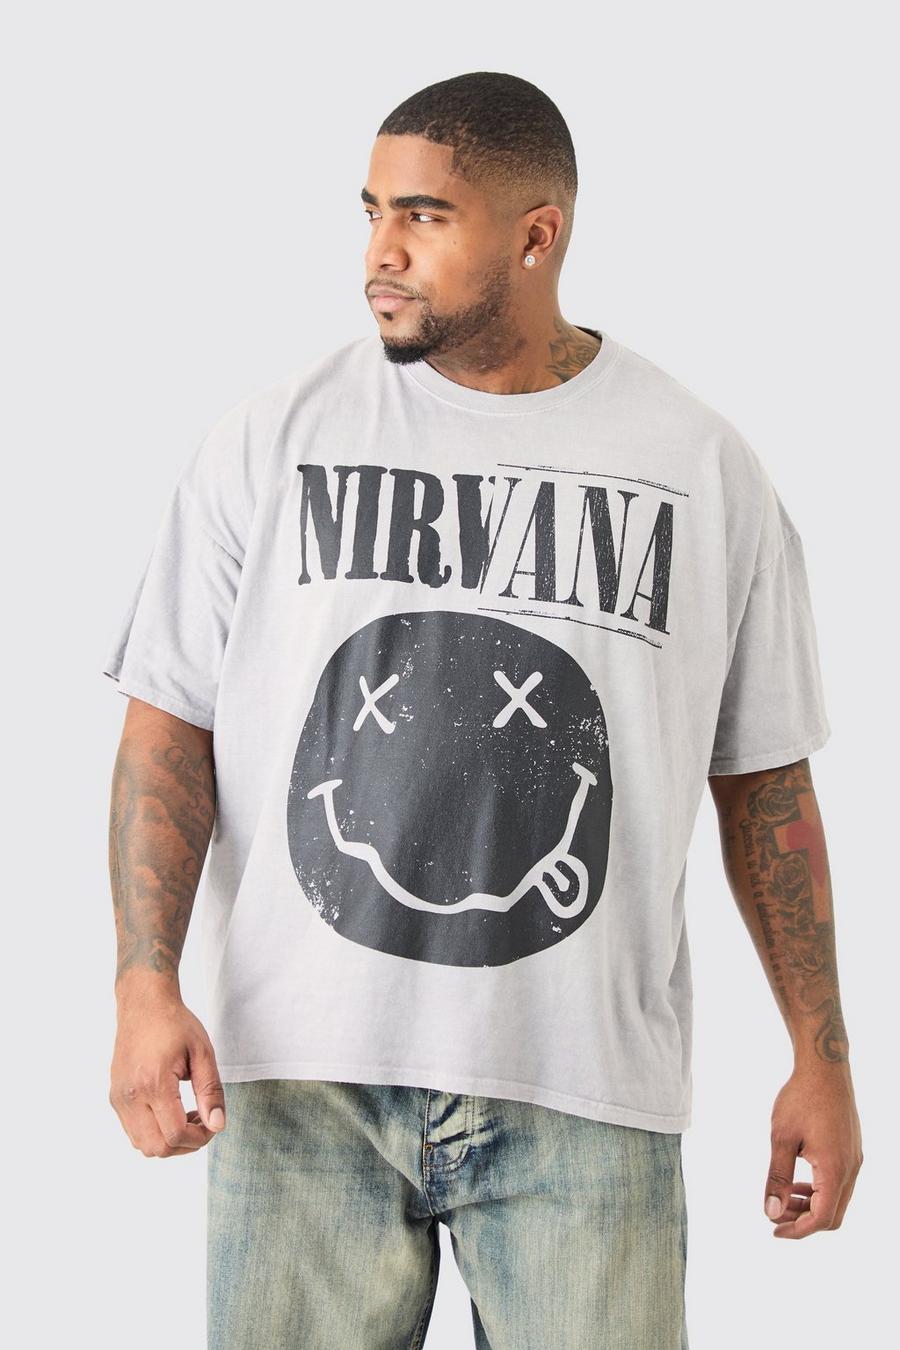 T-shirt Plus Size sovratinta ufficiale Nirvana con faccina sorridente, Grey image number 1